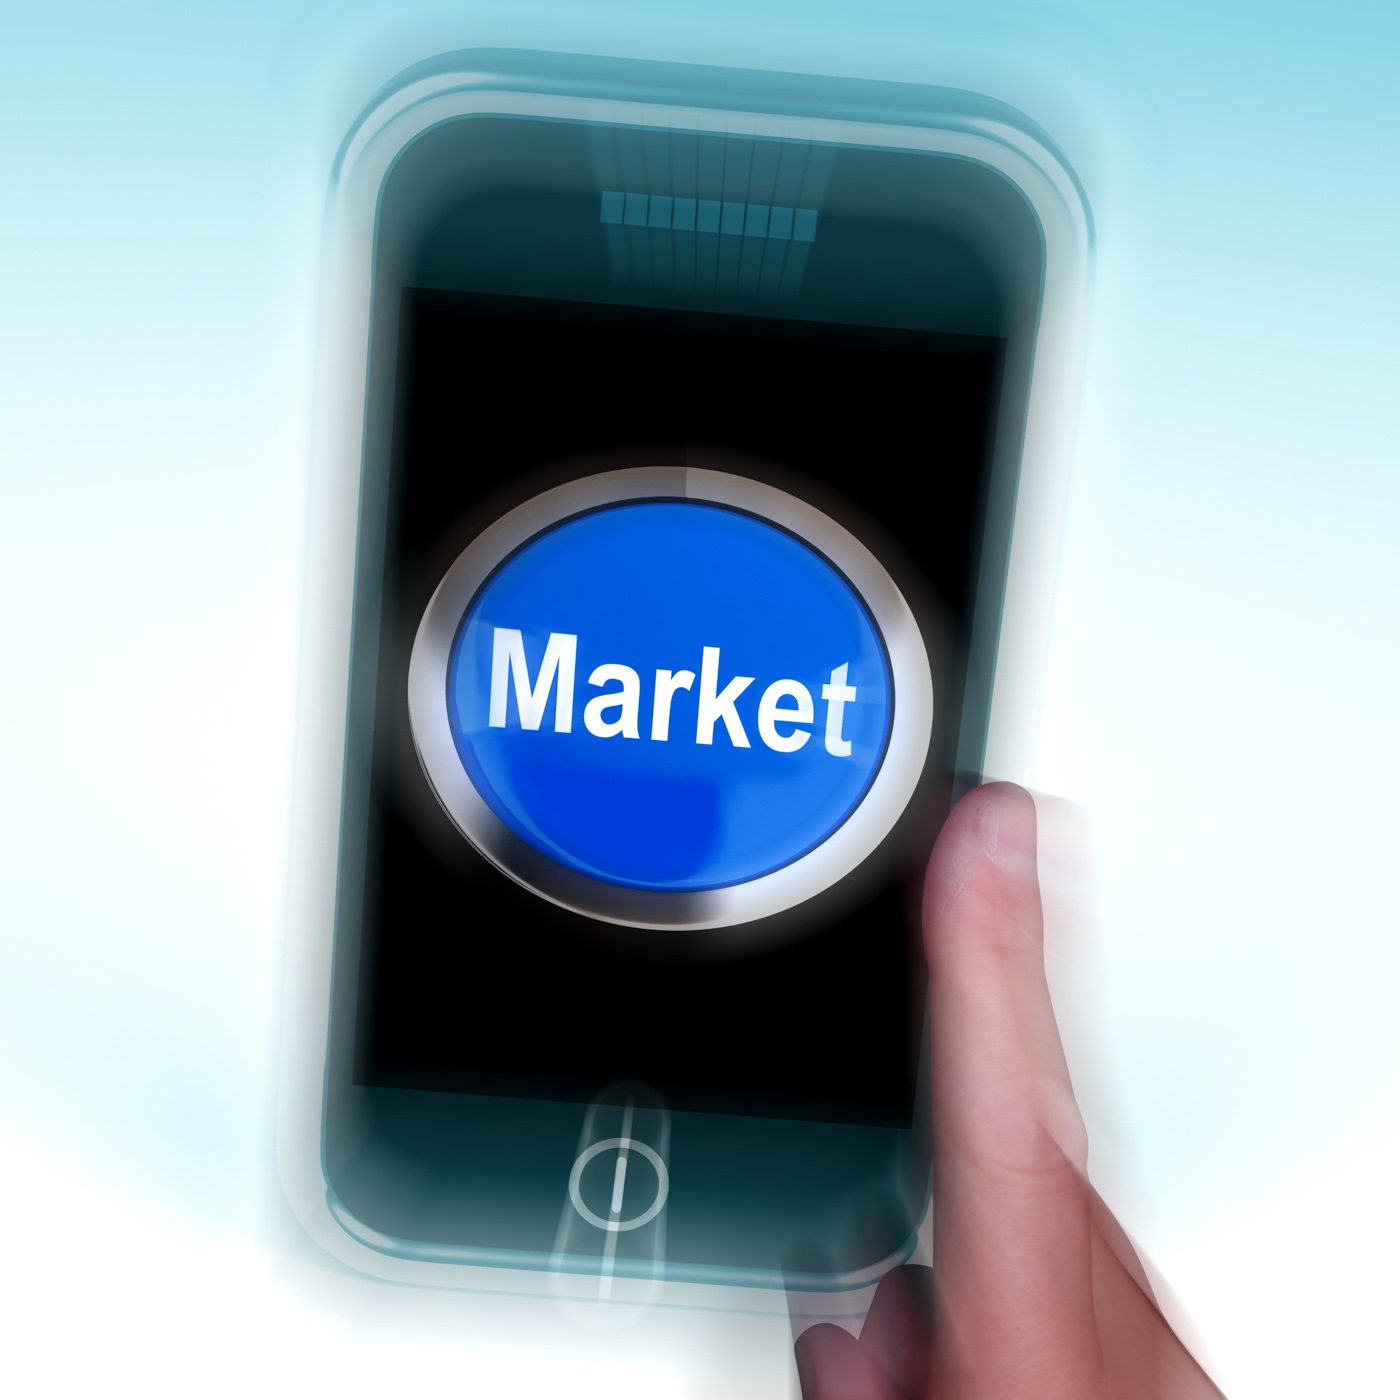 Market on mobile phone means marketing advertising sales photo